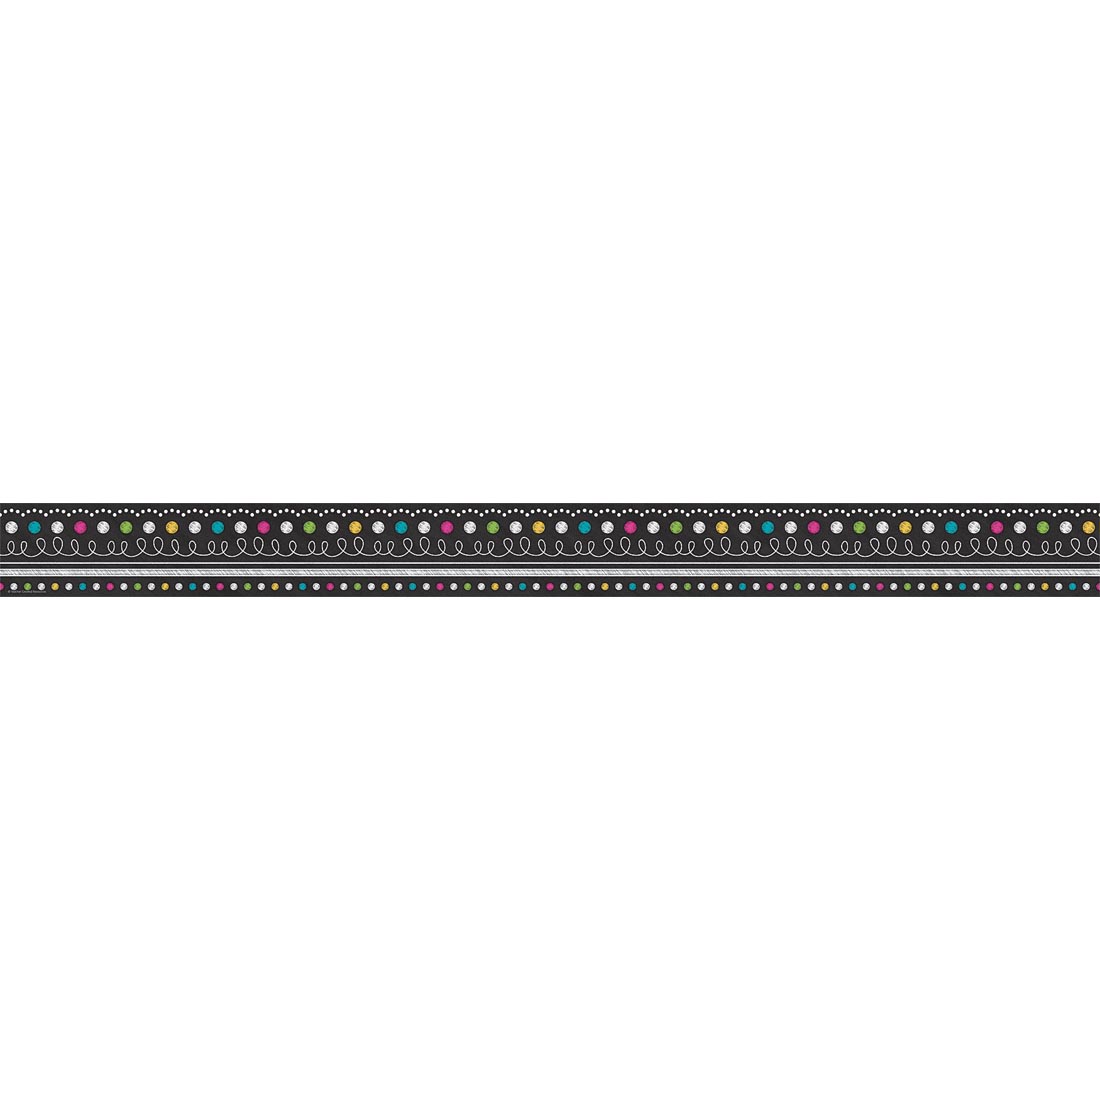 Straight Border Trim from the Chalkboard Brights collection by Teacher Created Resources